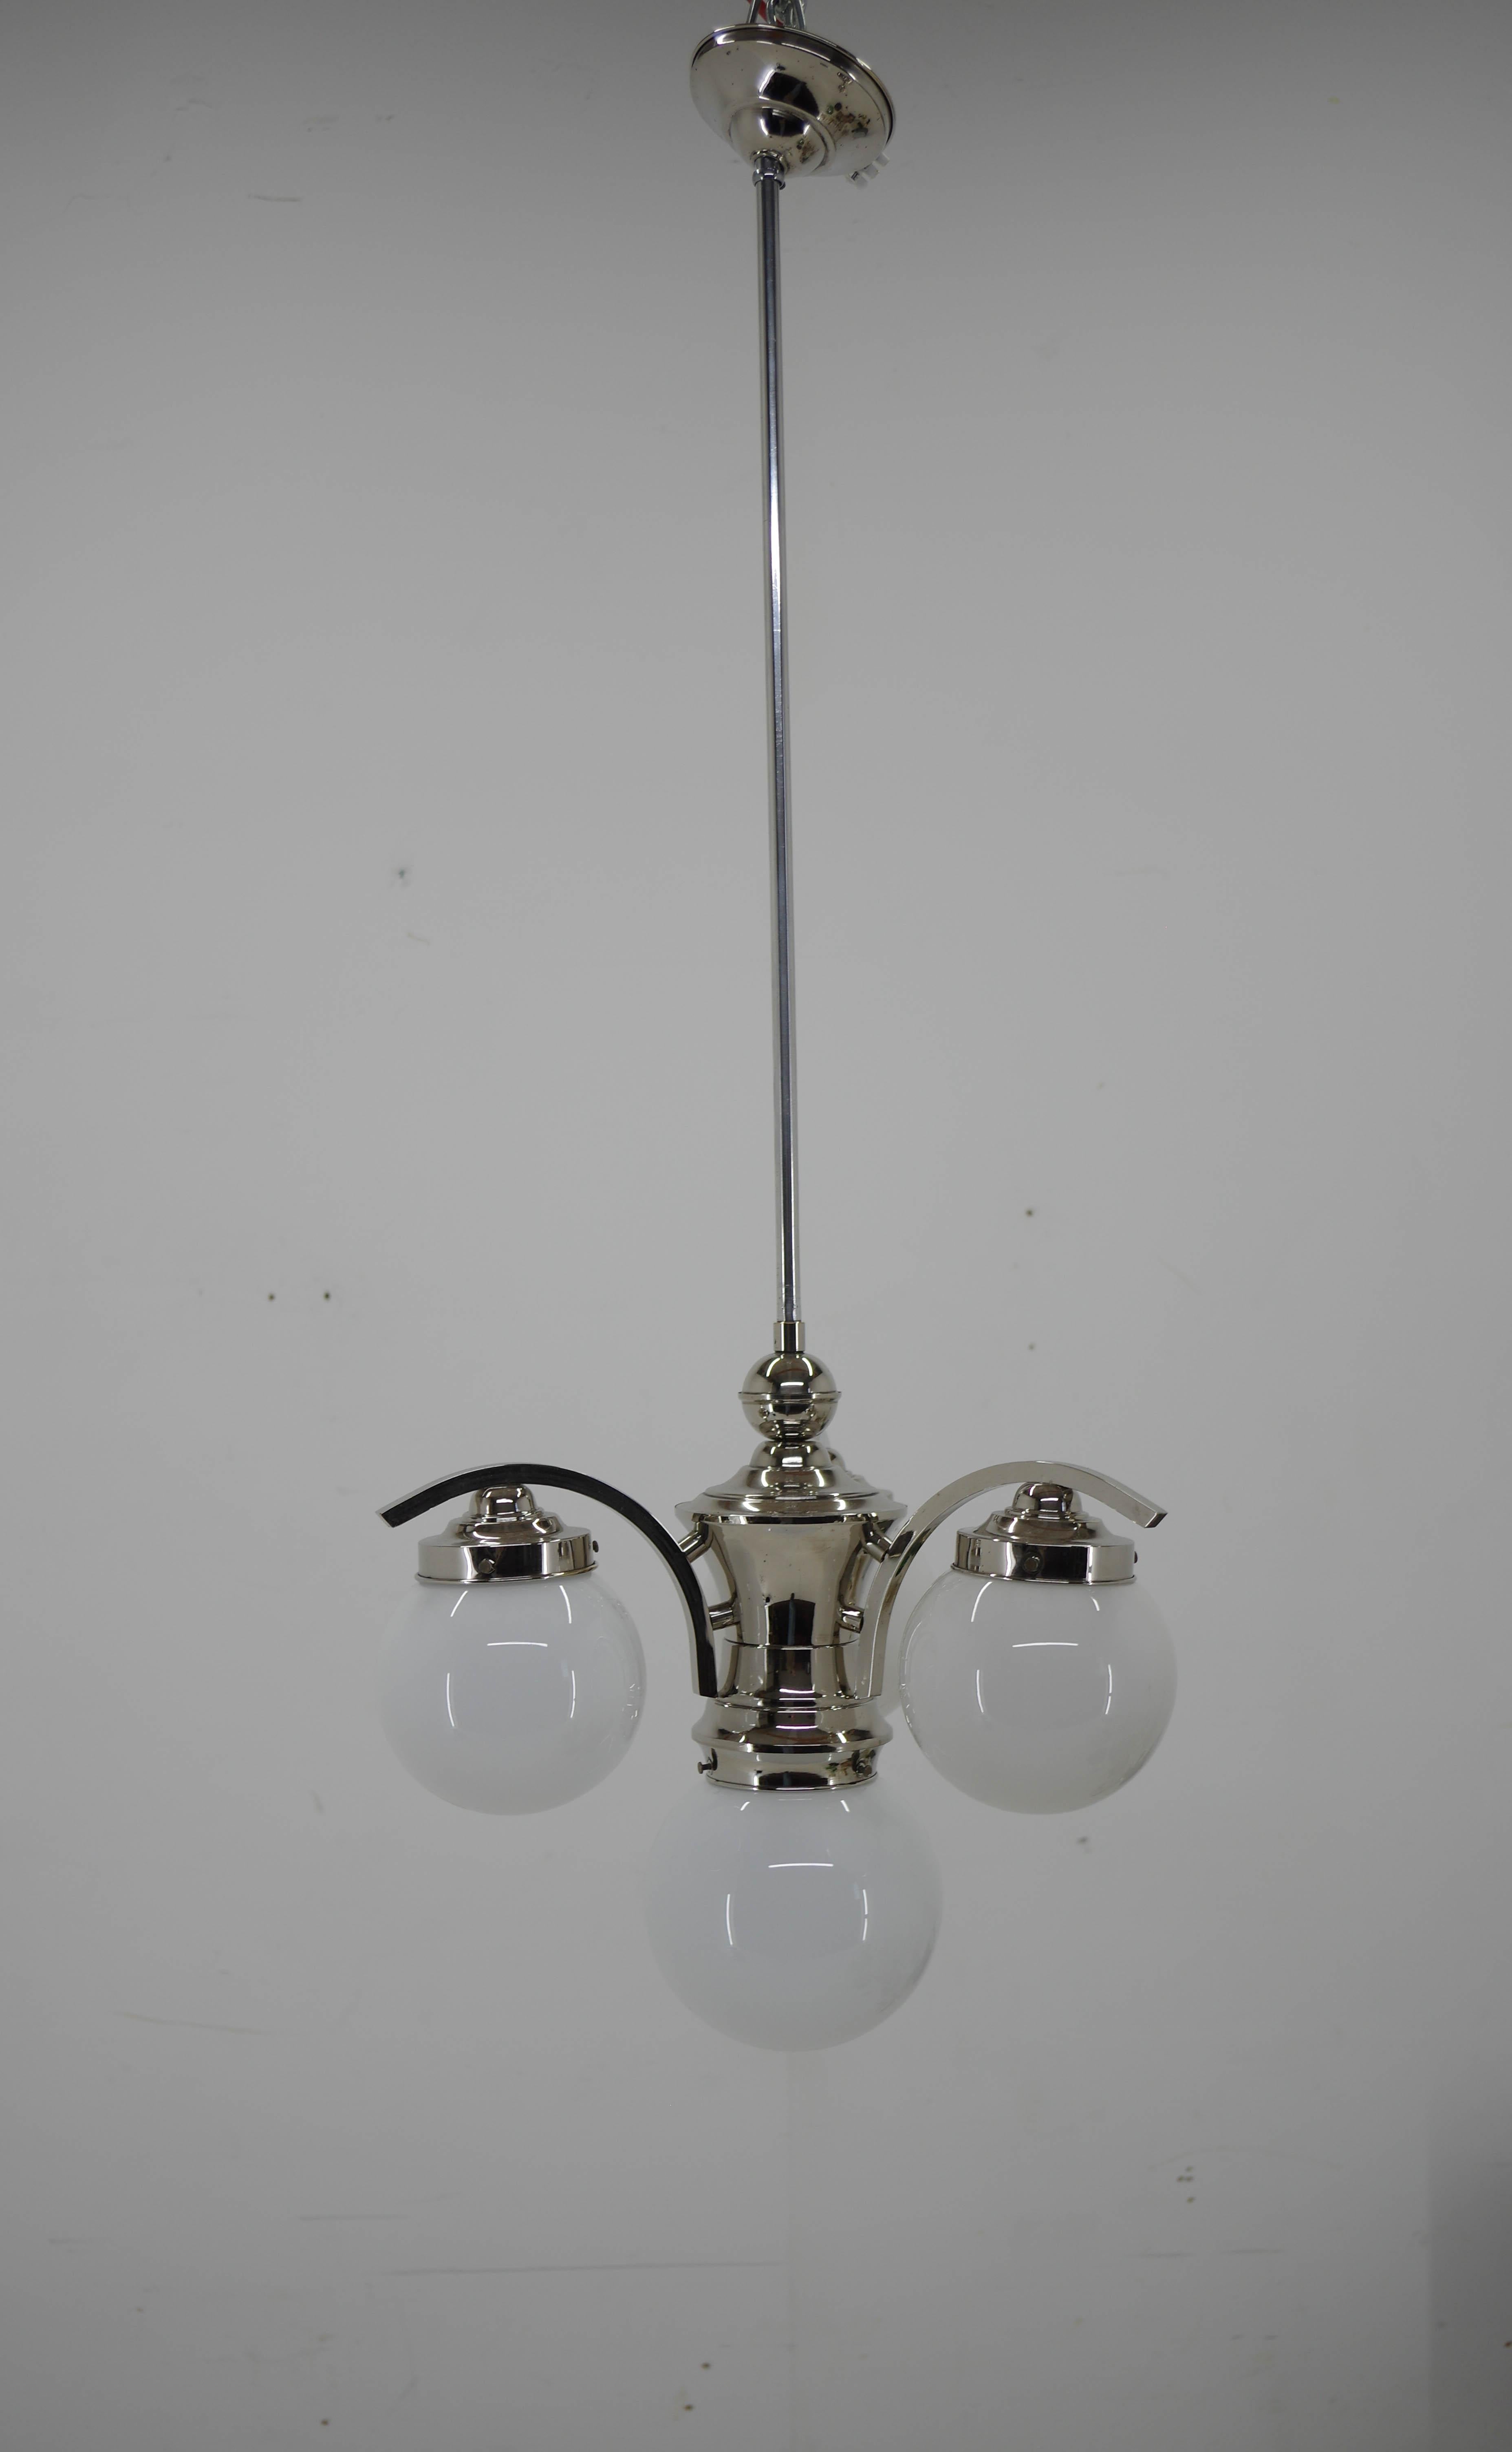 4-flamming Art Deco chandelier with opaline glass shades.
Central rod can be shortened on demand.
Restored: chrome polished, rewired.
Two separate circuits: 1+3x60W, E25-E27 bulbs
US wiring compatible